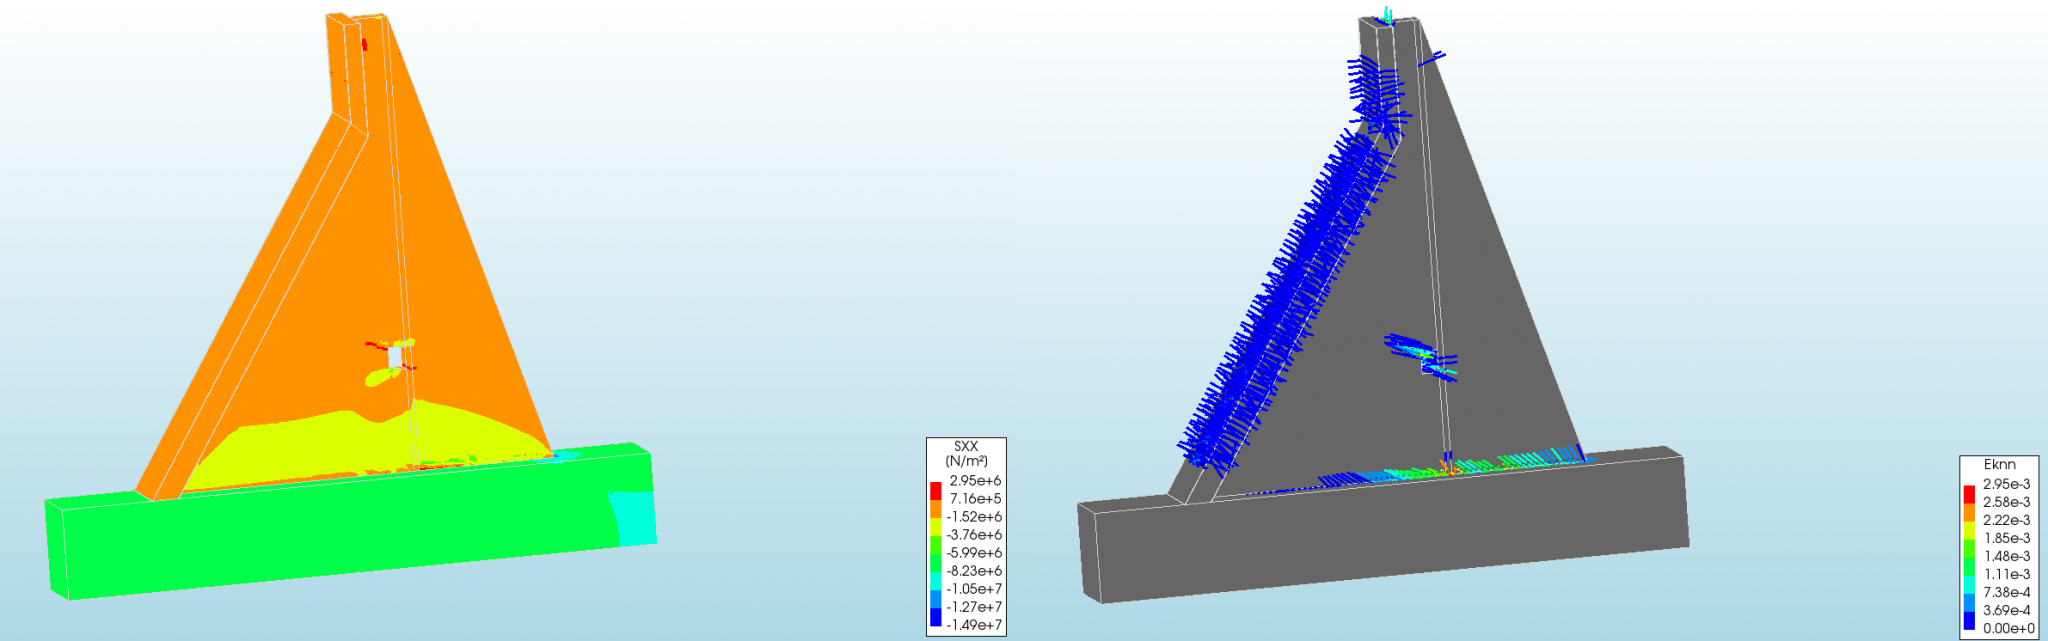 Fracture and Crack Simulation of Dam in Earthquake and seismic loading